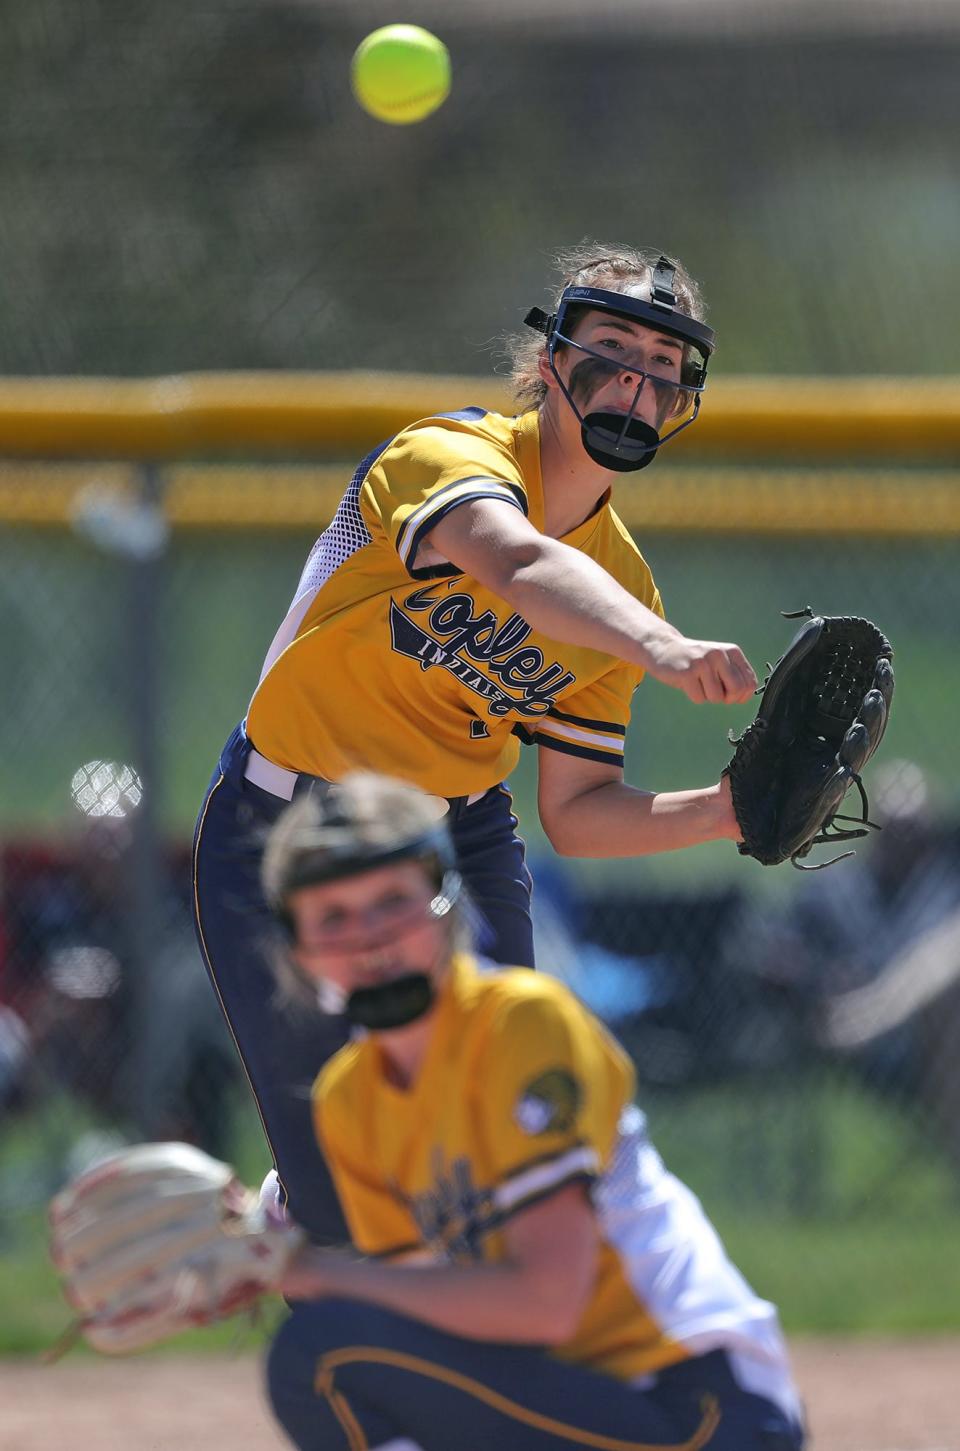 Copley third baseman Sammy Gingras throws to first to put out Tallmadge batter Leila Staszak during the fifth inning of a Division II district semifinal softball game in Canton on Tuesday.